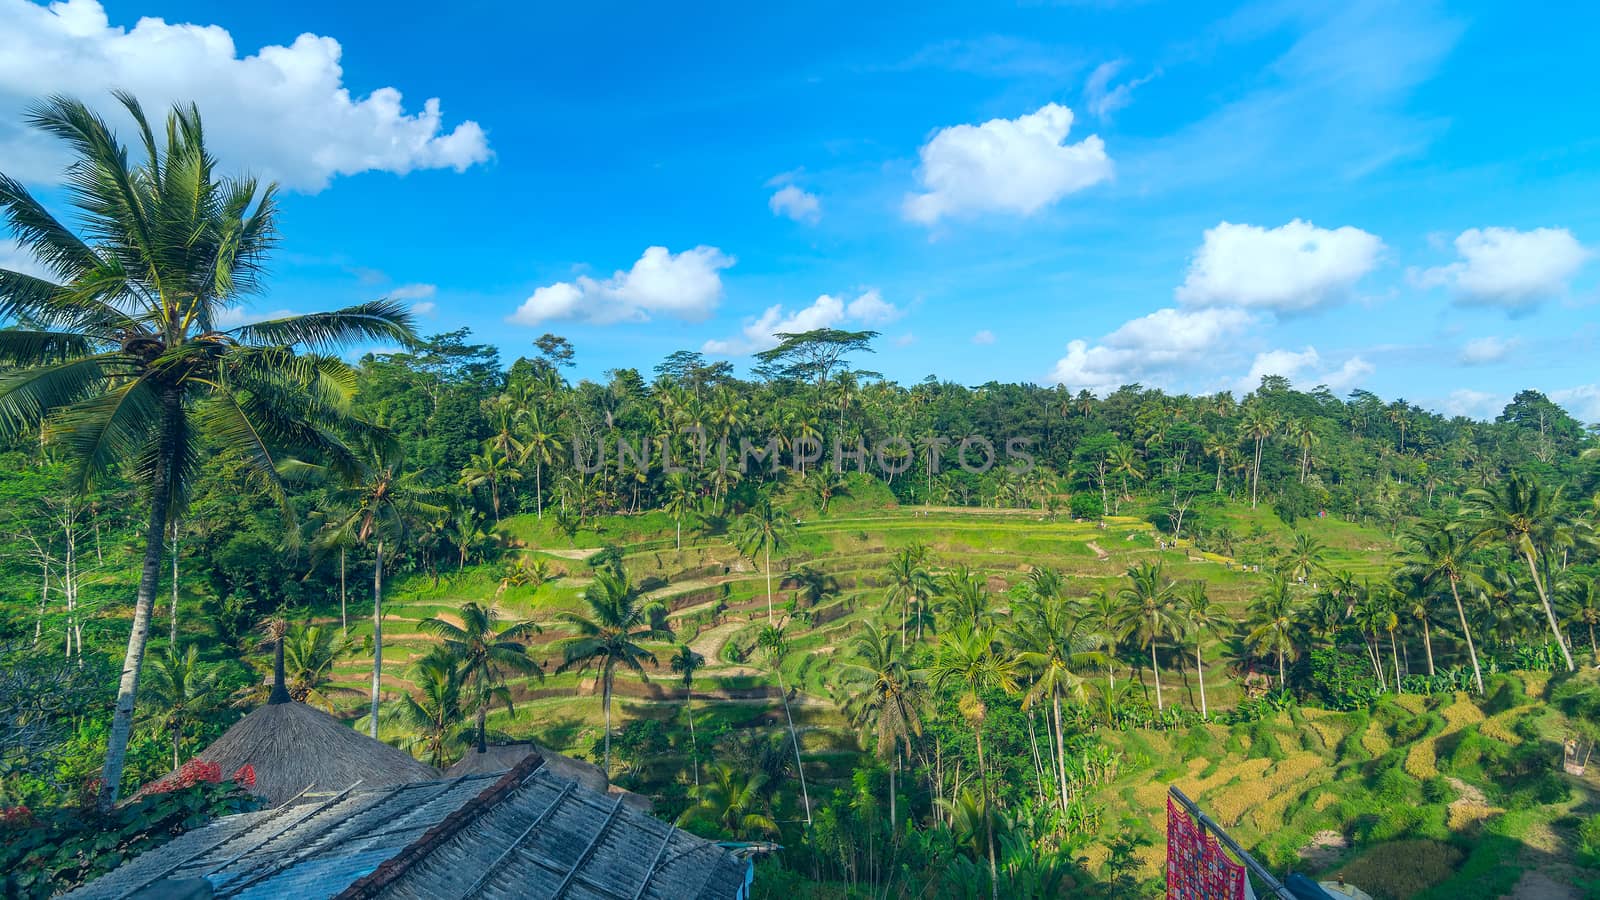 Landscape of famous rice terraces near Ubud in Bali, Indonesia by BIG_TAU